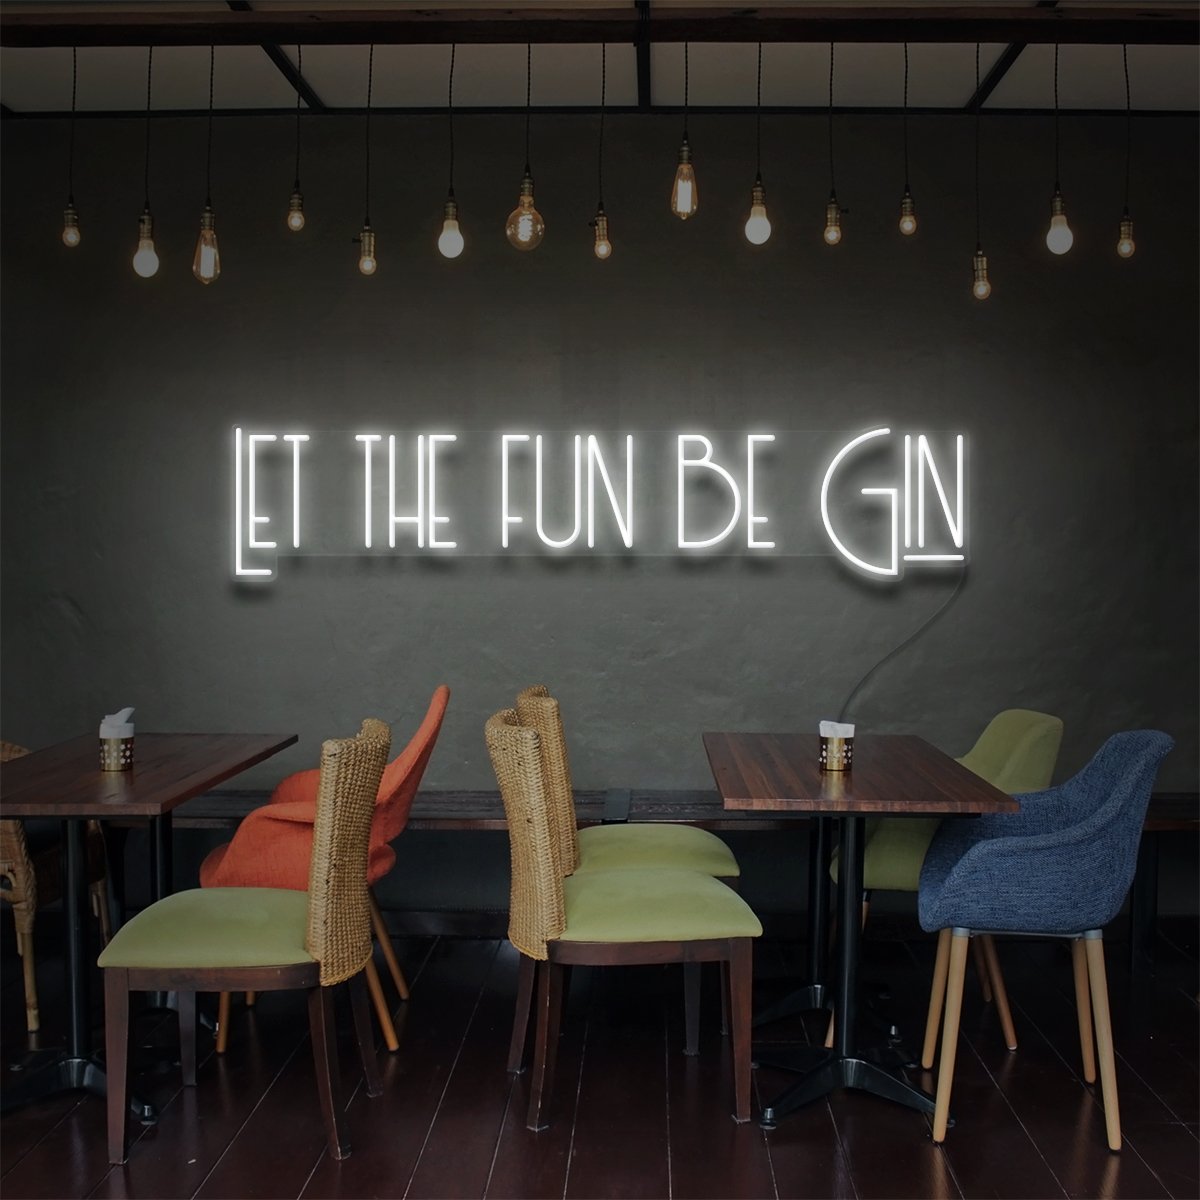 "Let The Fun Be Gin" Neon Sign for Bars & Restaurants 90cm (3ft) / White / LED Neon by Neon Icons